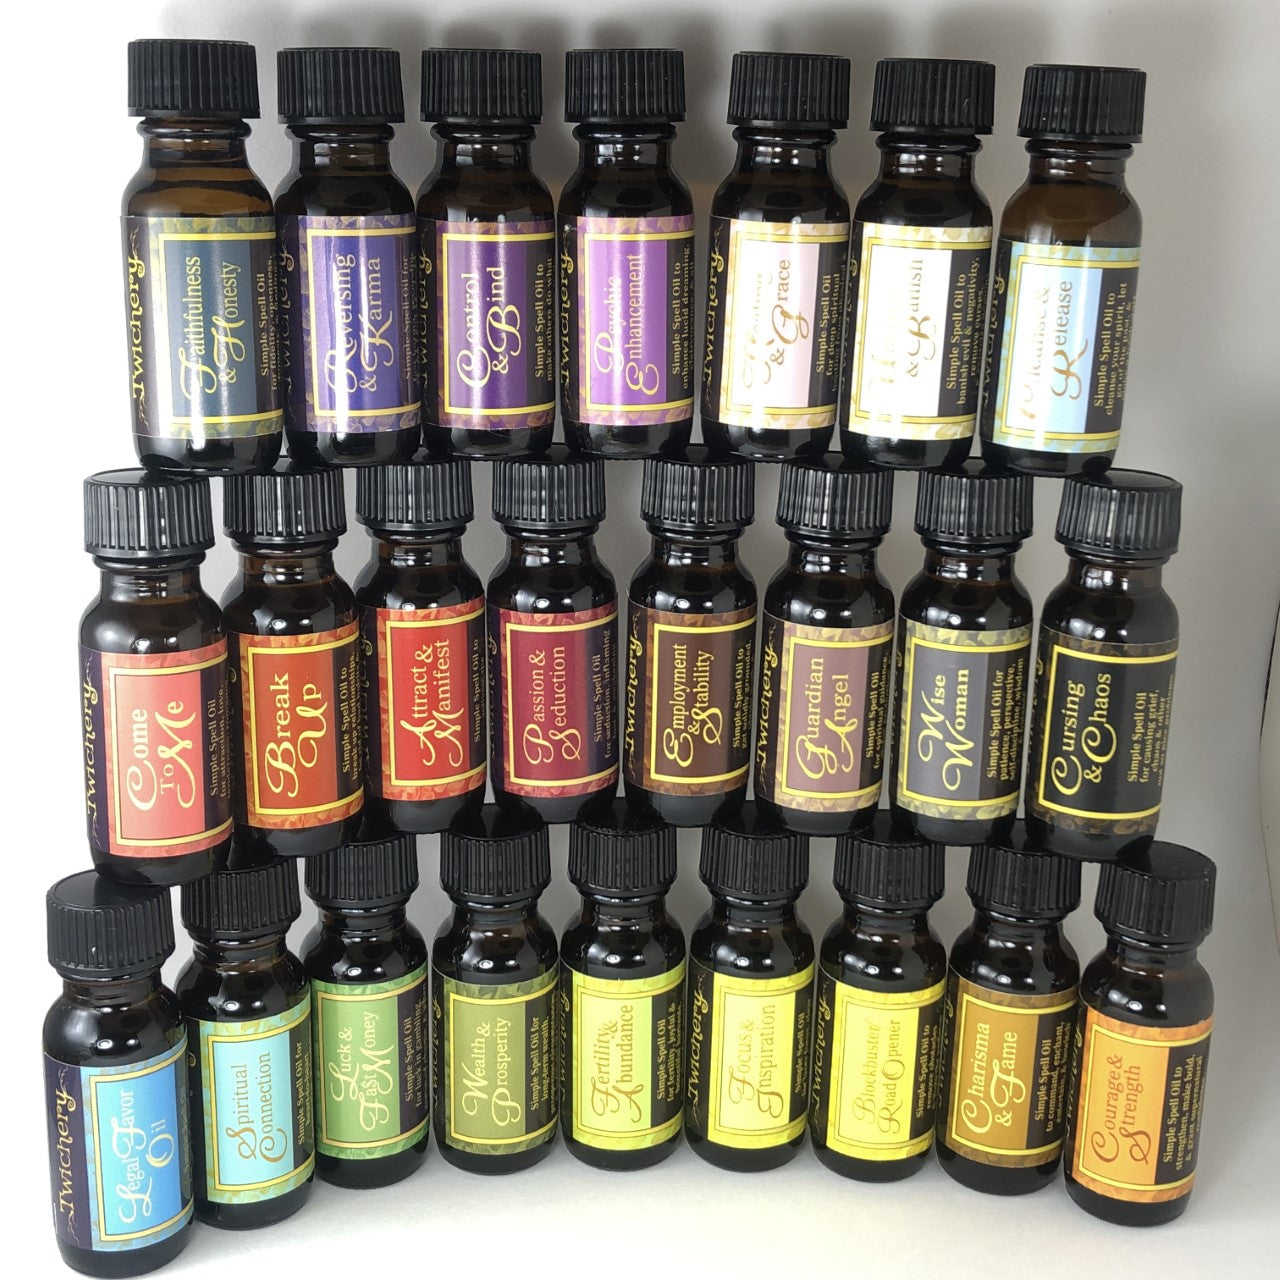 Twichery Quikspell Oils for Courage & Strength are beautifully collectible! Wise Woman Oil pictured with all other Twichery Quikspell Oils! Hoodoo, Voodoo, Wicca, Pagan